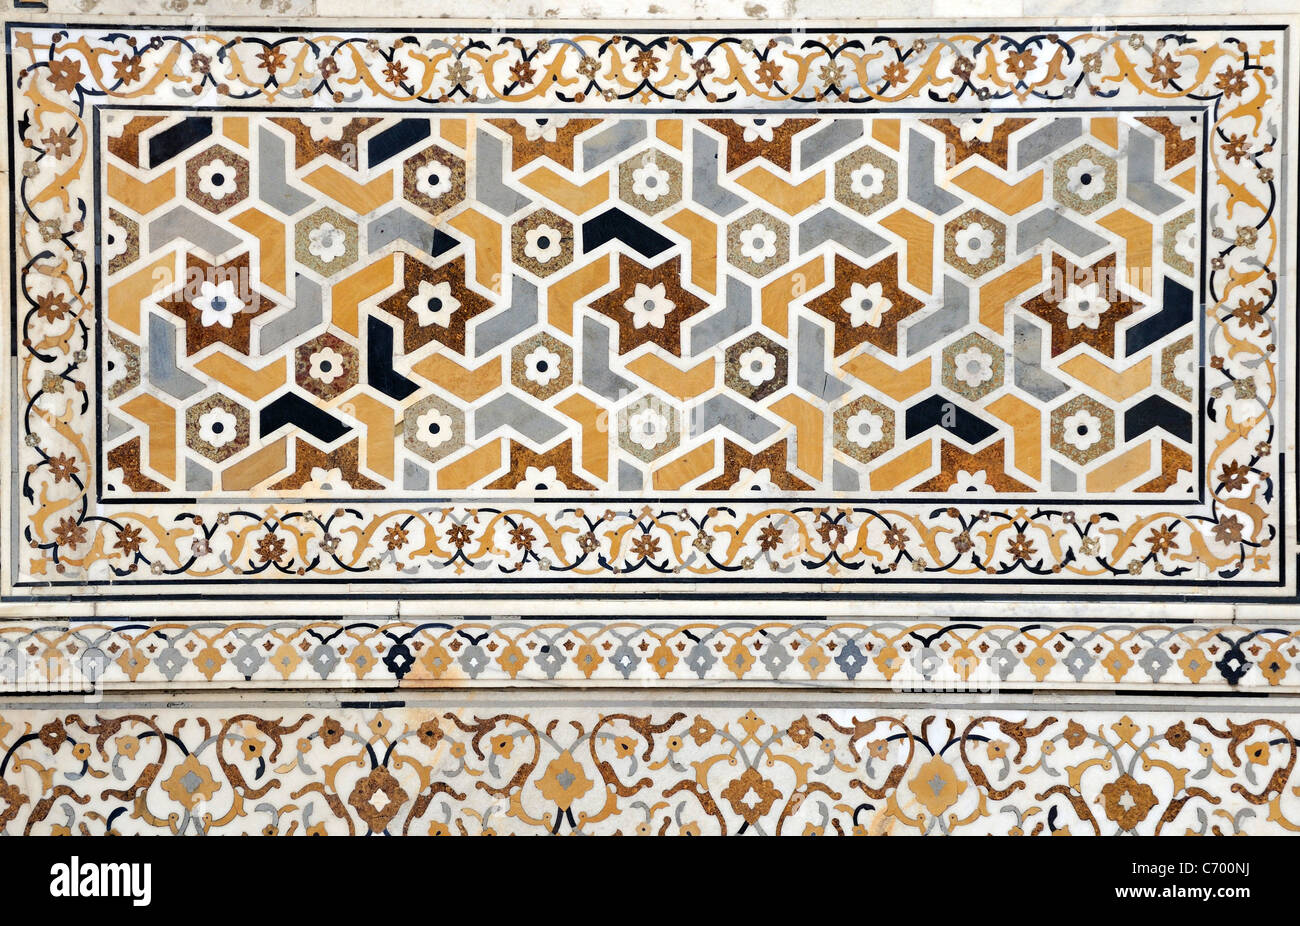 A wall decorated with  a repeating pattern of regular shapes made from semi precious stones inlaid in white marble. Stock Photo